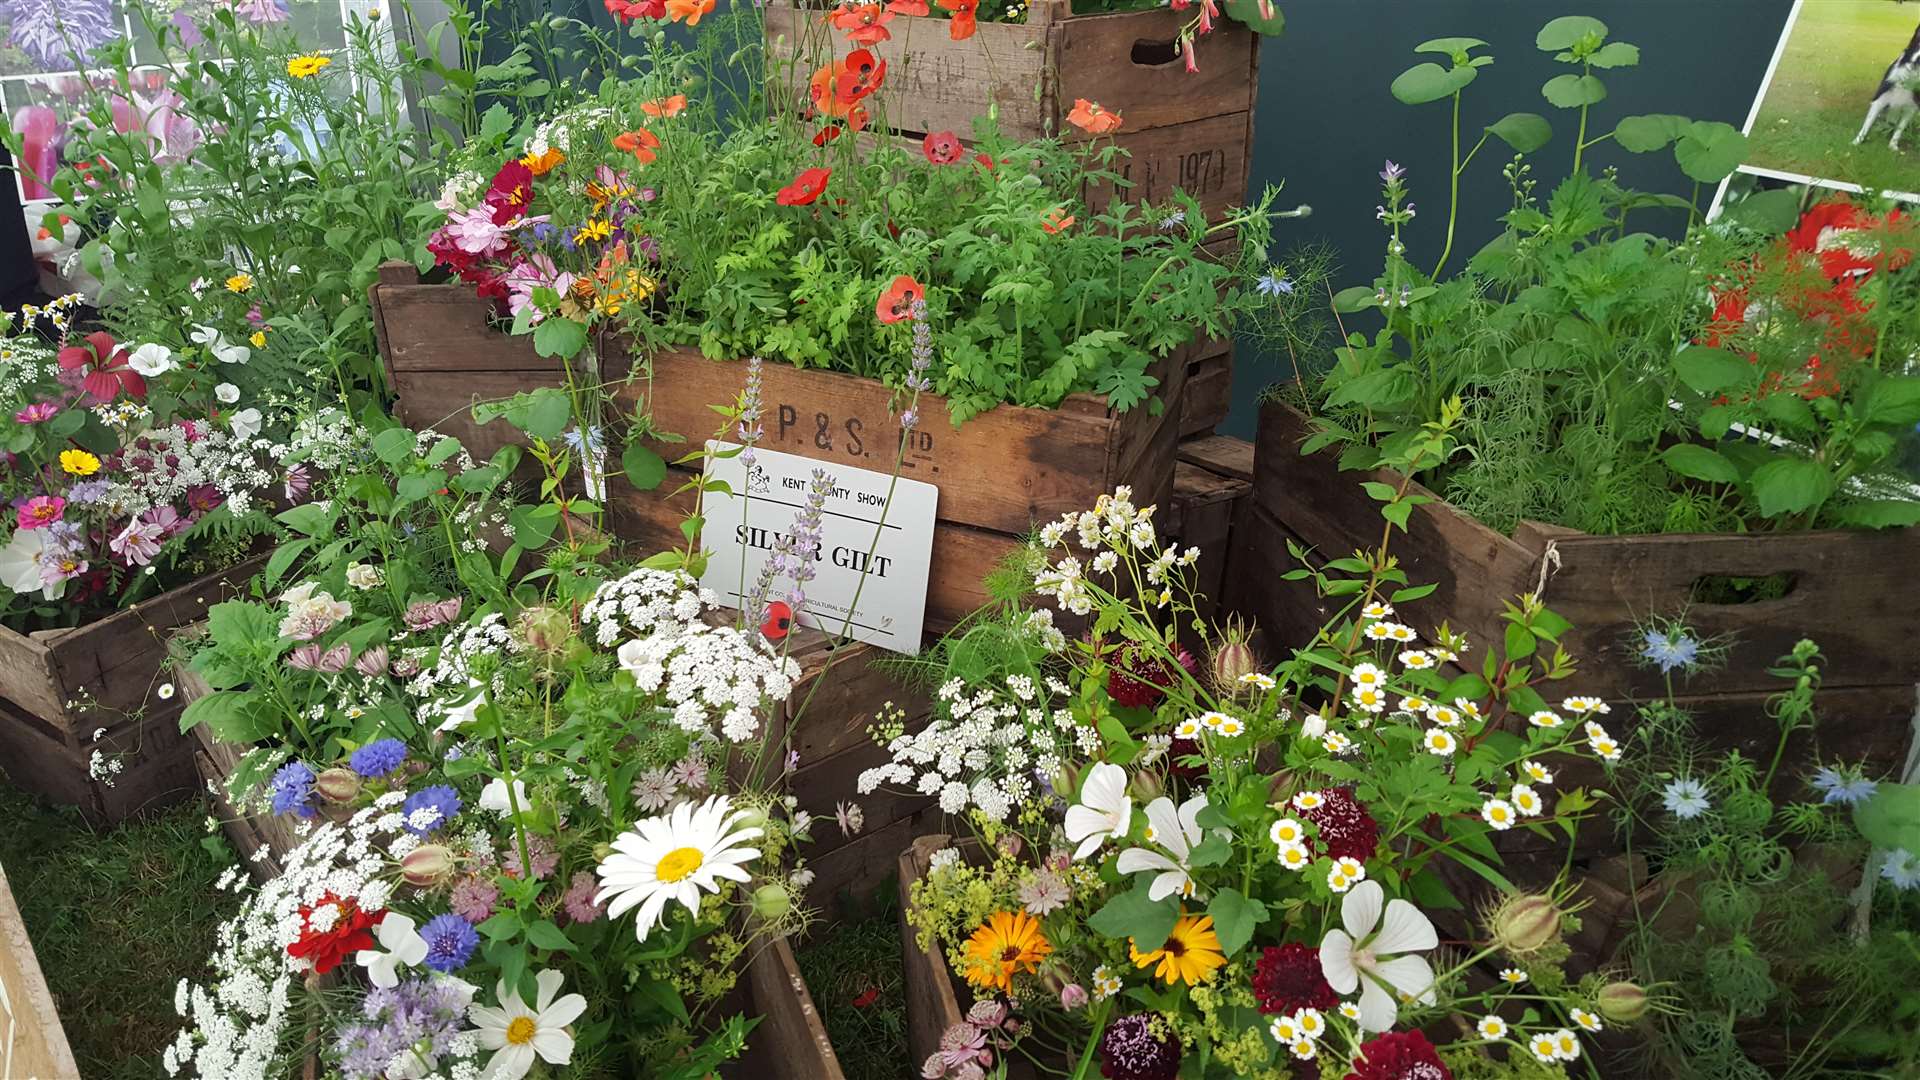 Shelley Sishton's wild flower display at Kent County Flower Show - appeared on The Farmers' Country Showdown BBC (6456983)